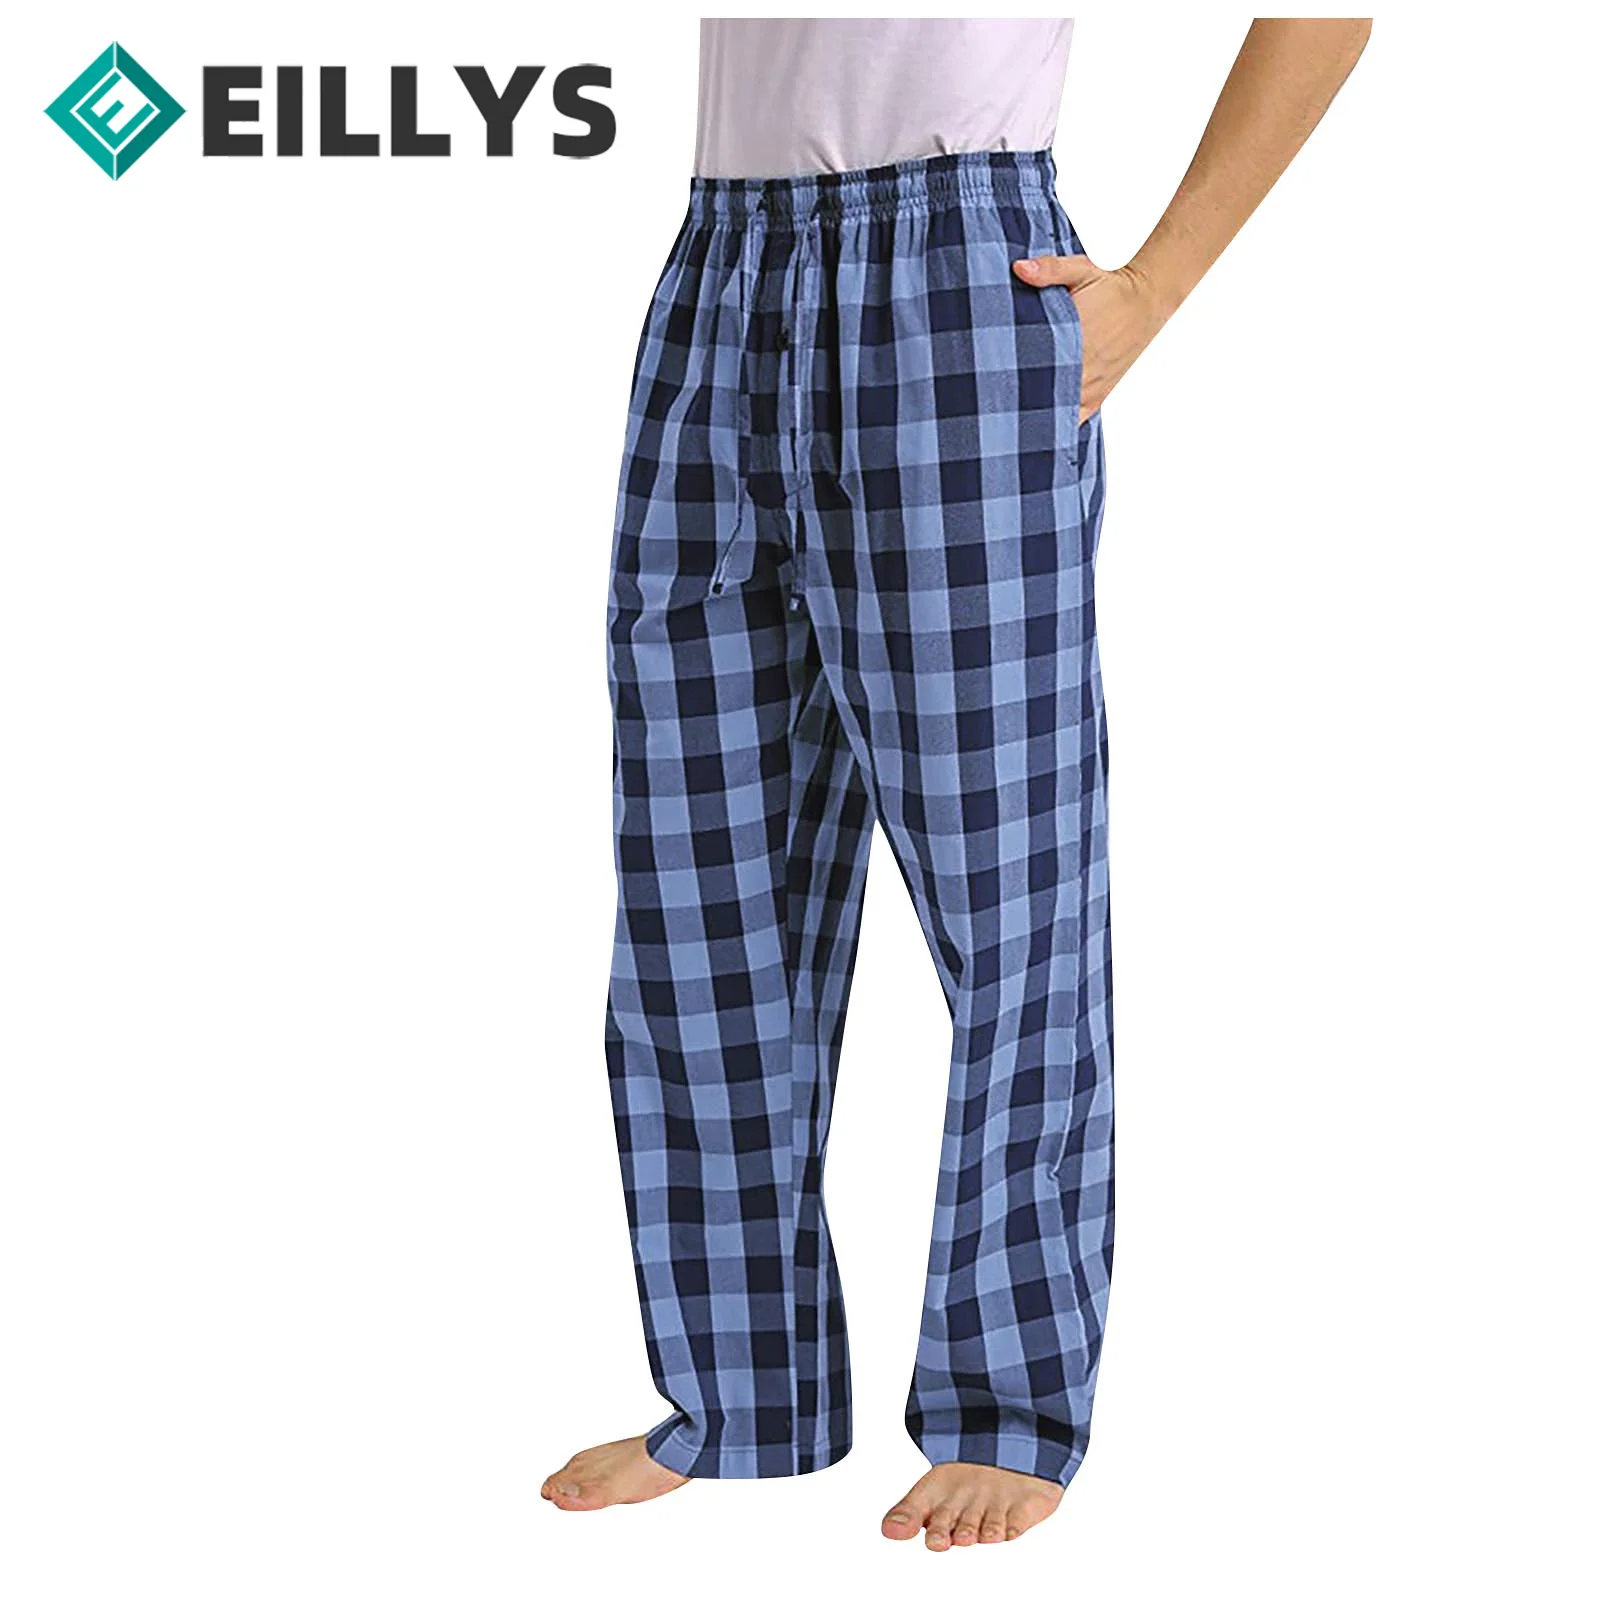 

Elastic Band Men’s Casual Pants Drawstring Loose Bottoms Cotton Casual Straight-leg Pants Japanese-style Lattice Home Trousers